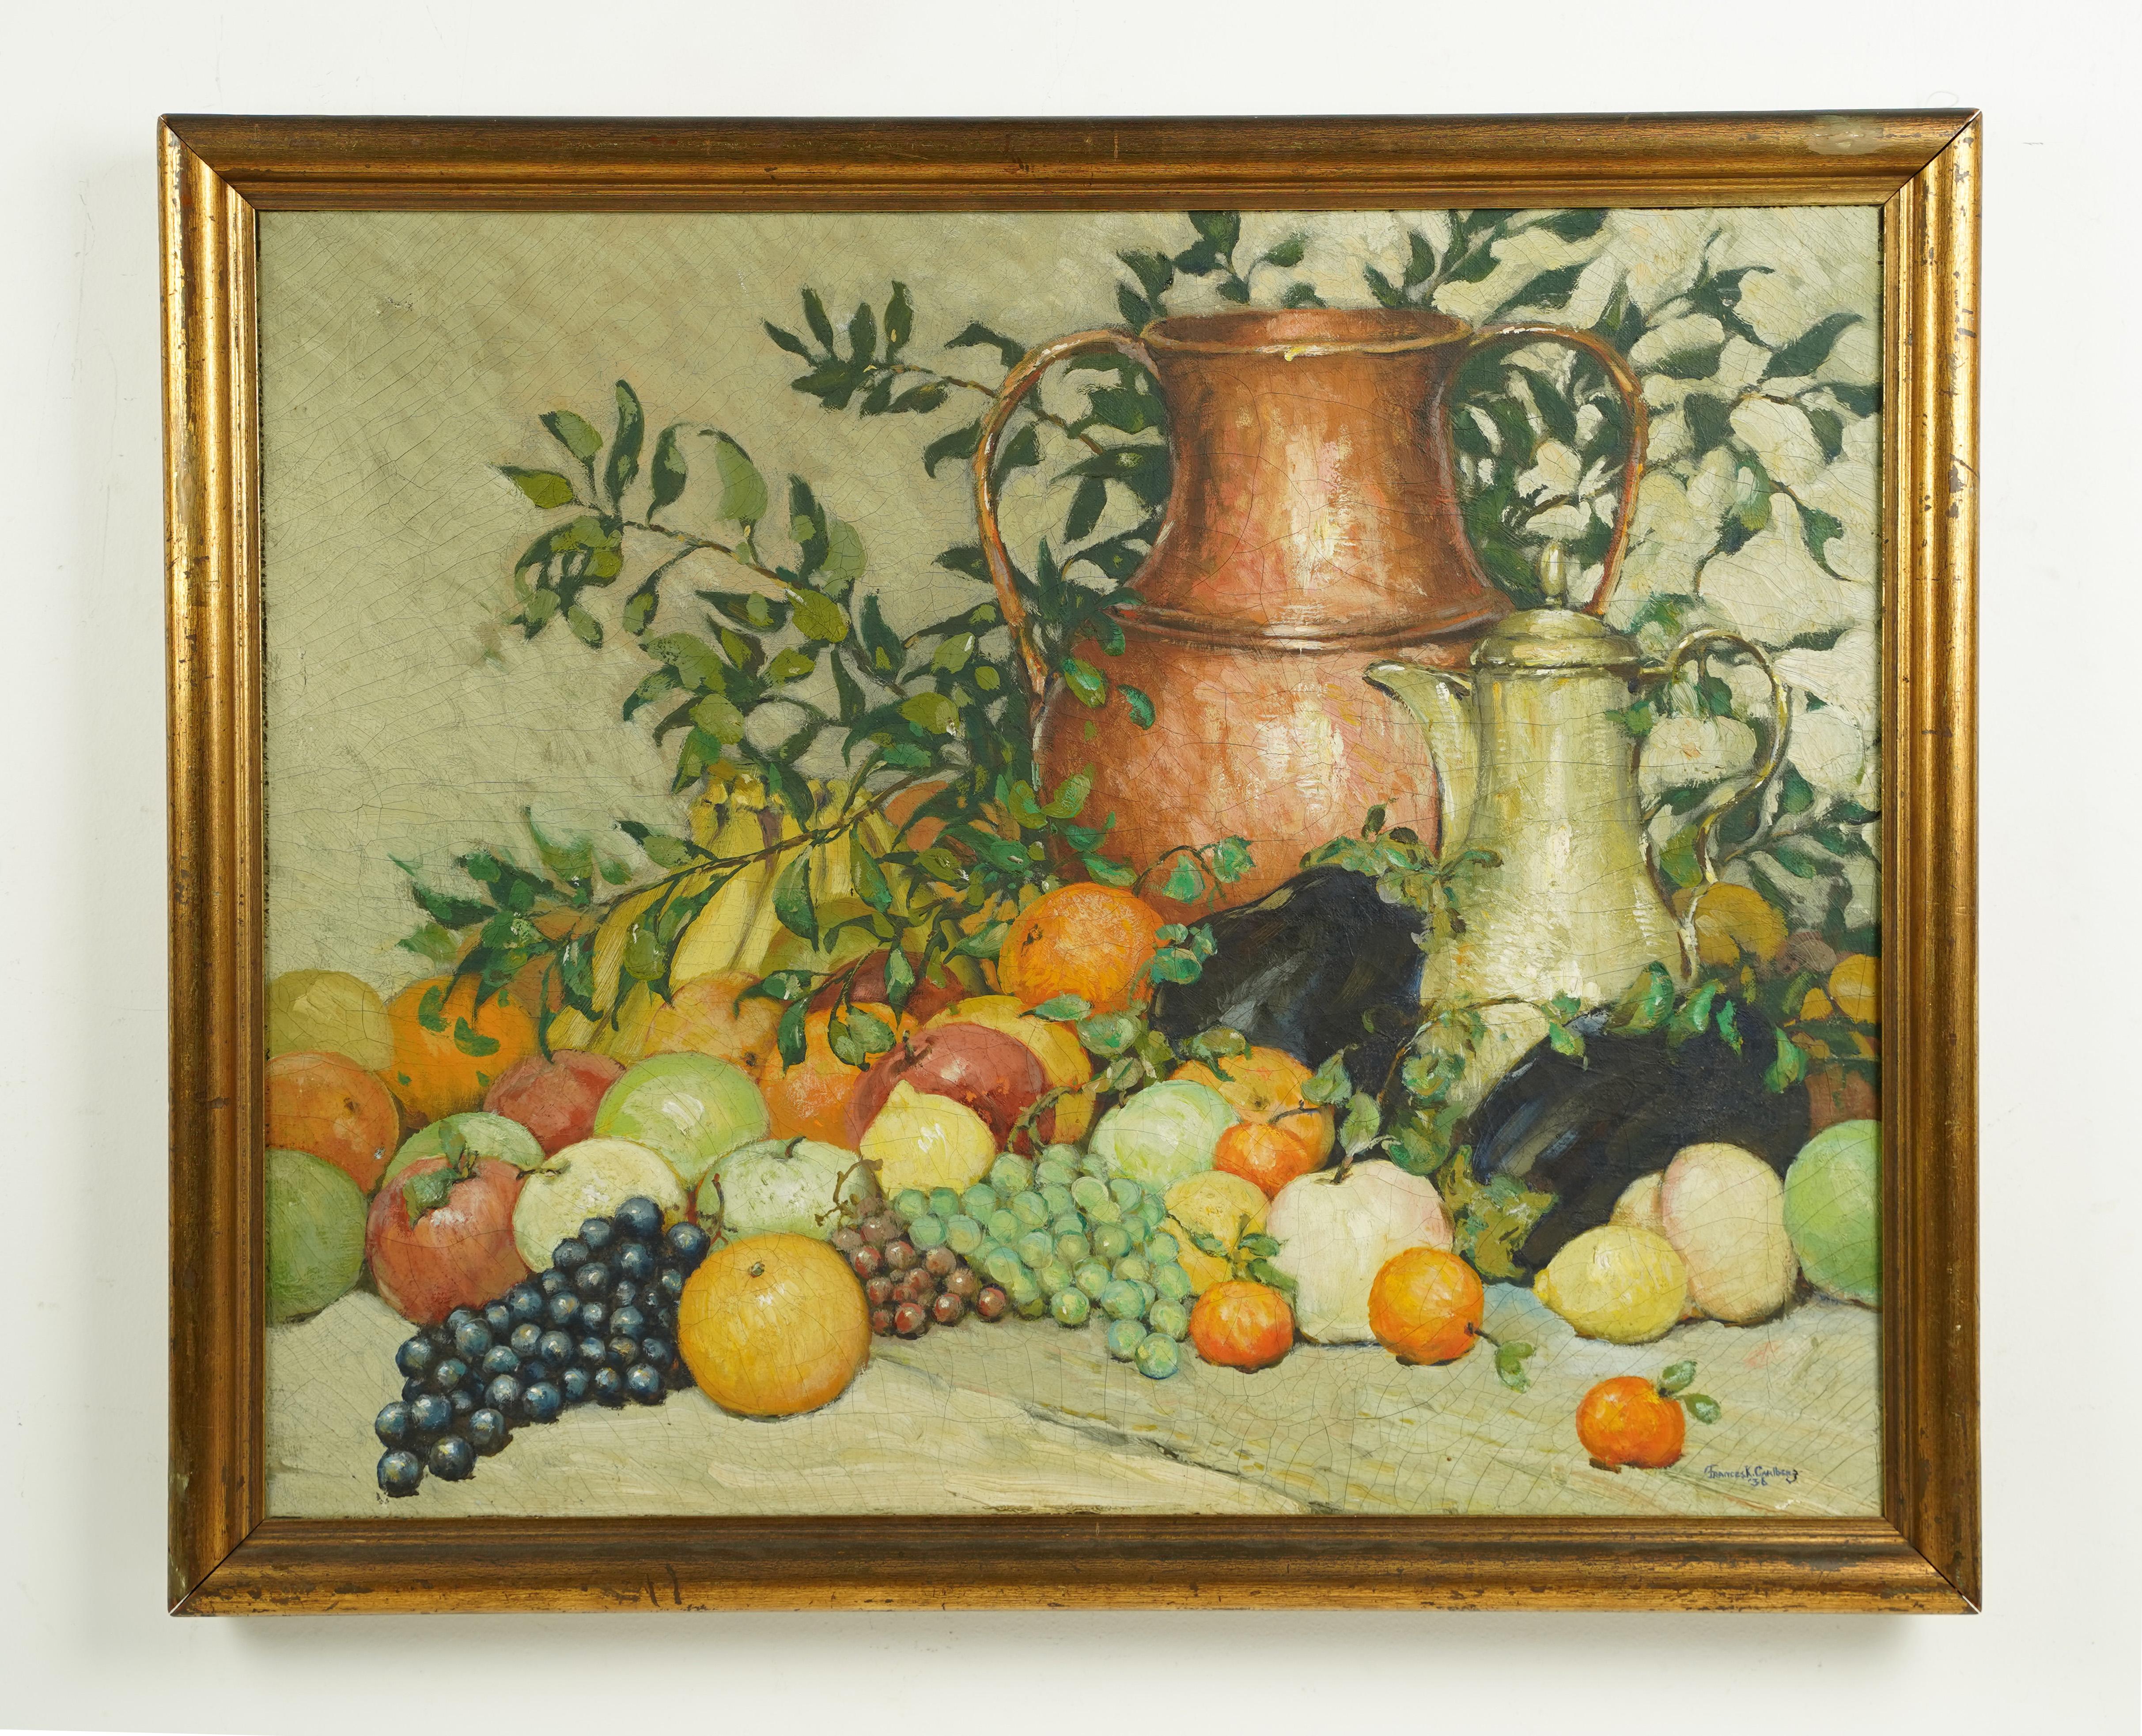 Antique American impressionist still life oil painting.  Oil on canvas.  Signed.  Framed.  Image size, 27L x 22H